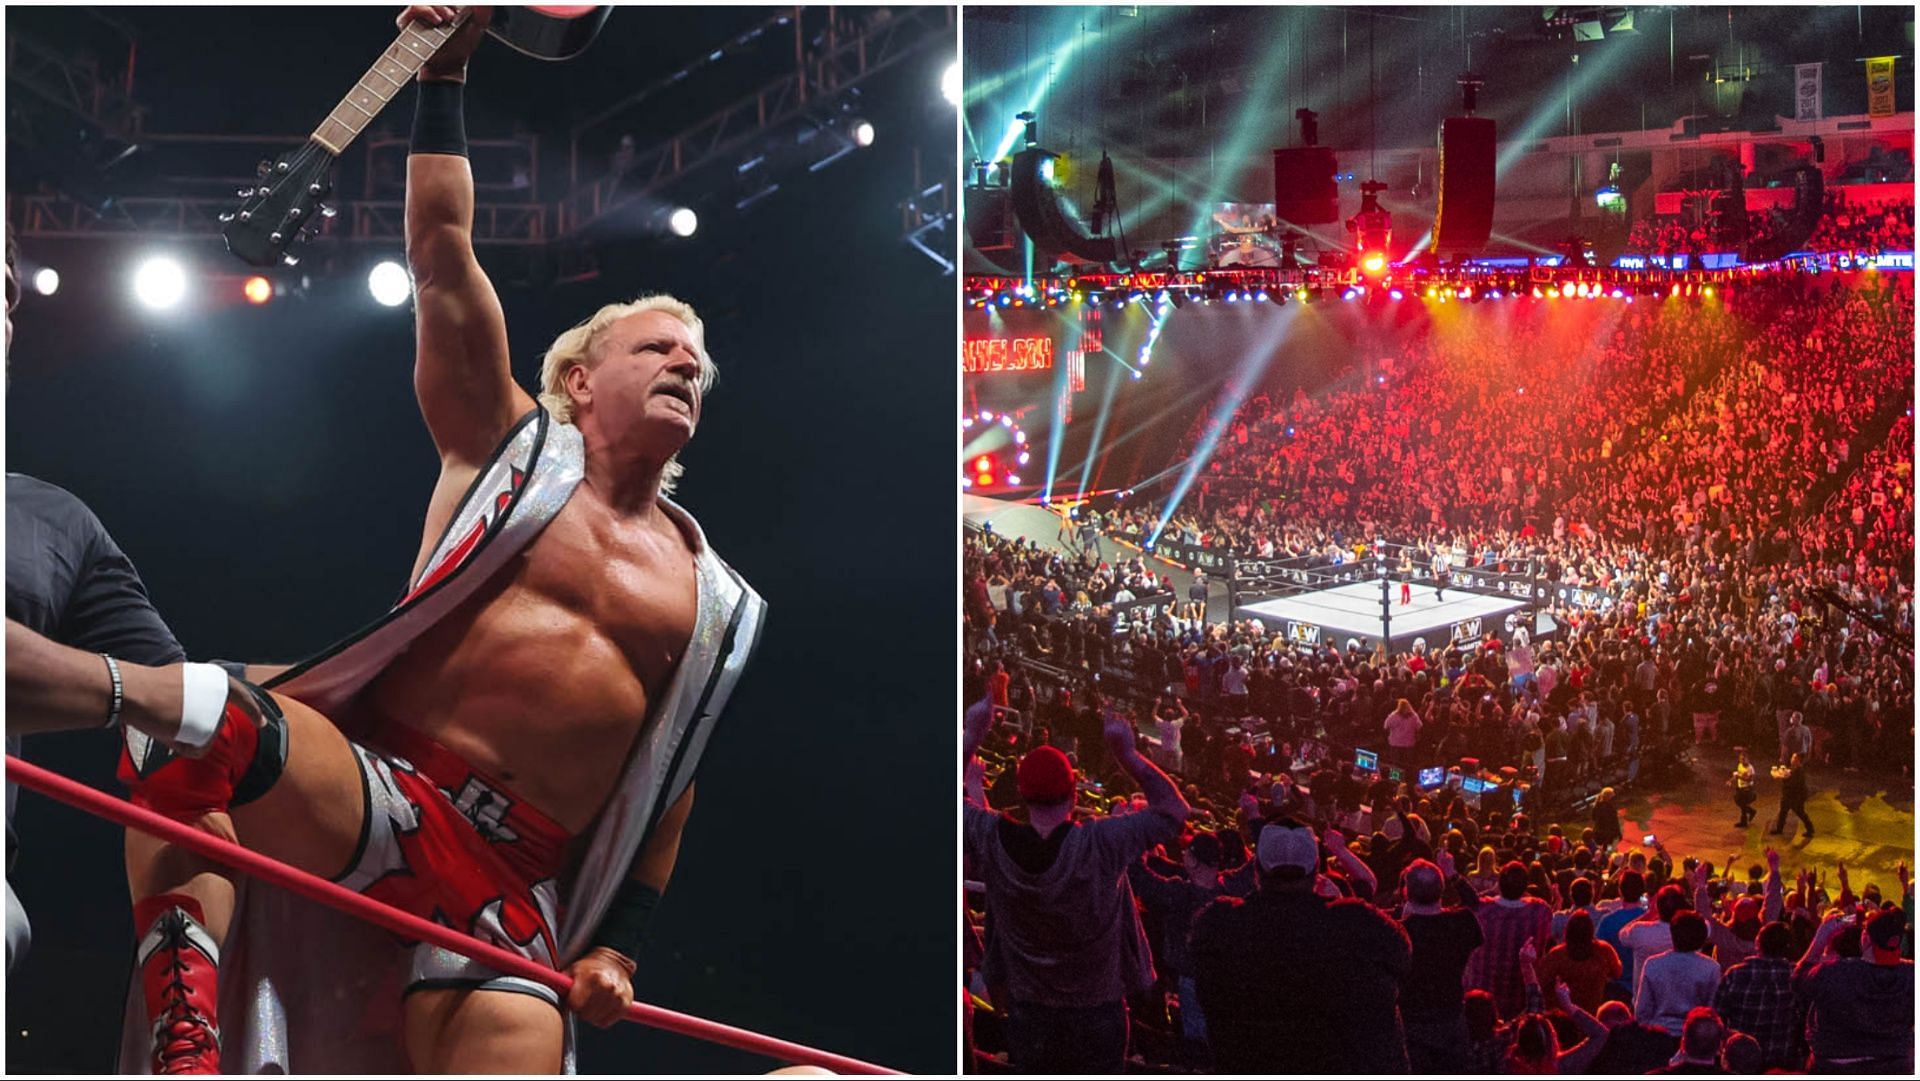 Jeff Jarrett poses on AEW Collision, AEW fans pack arena for Dynamite